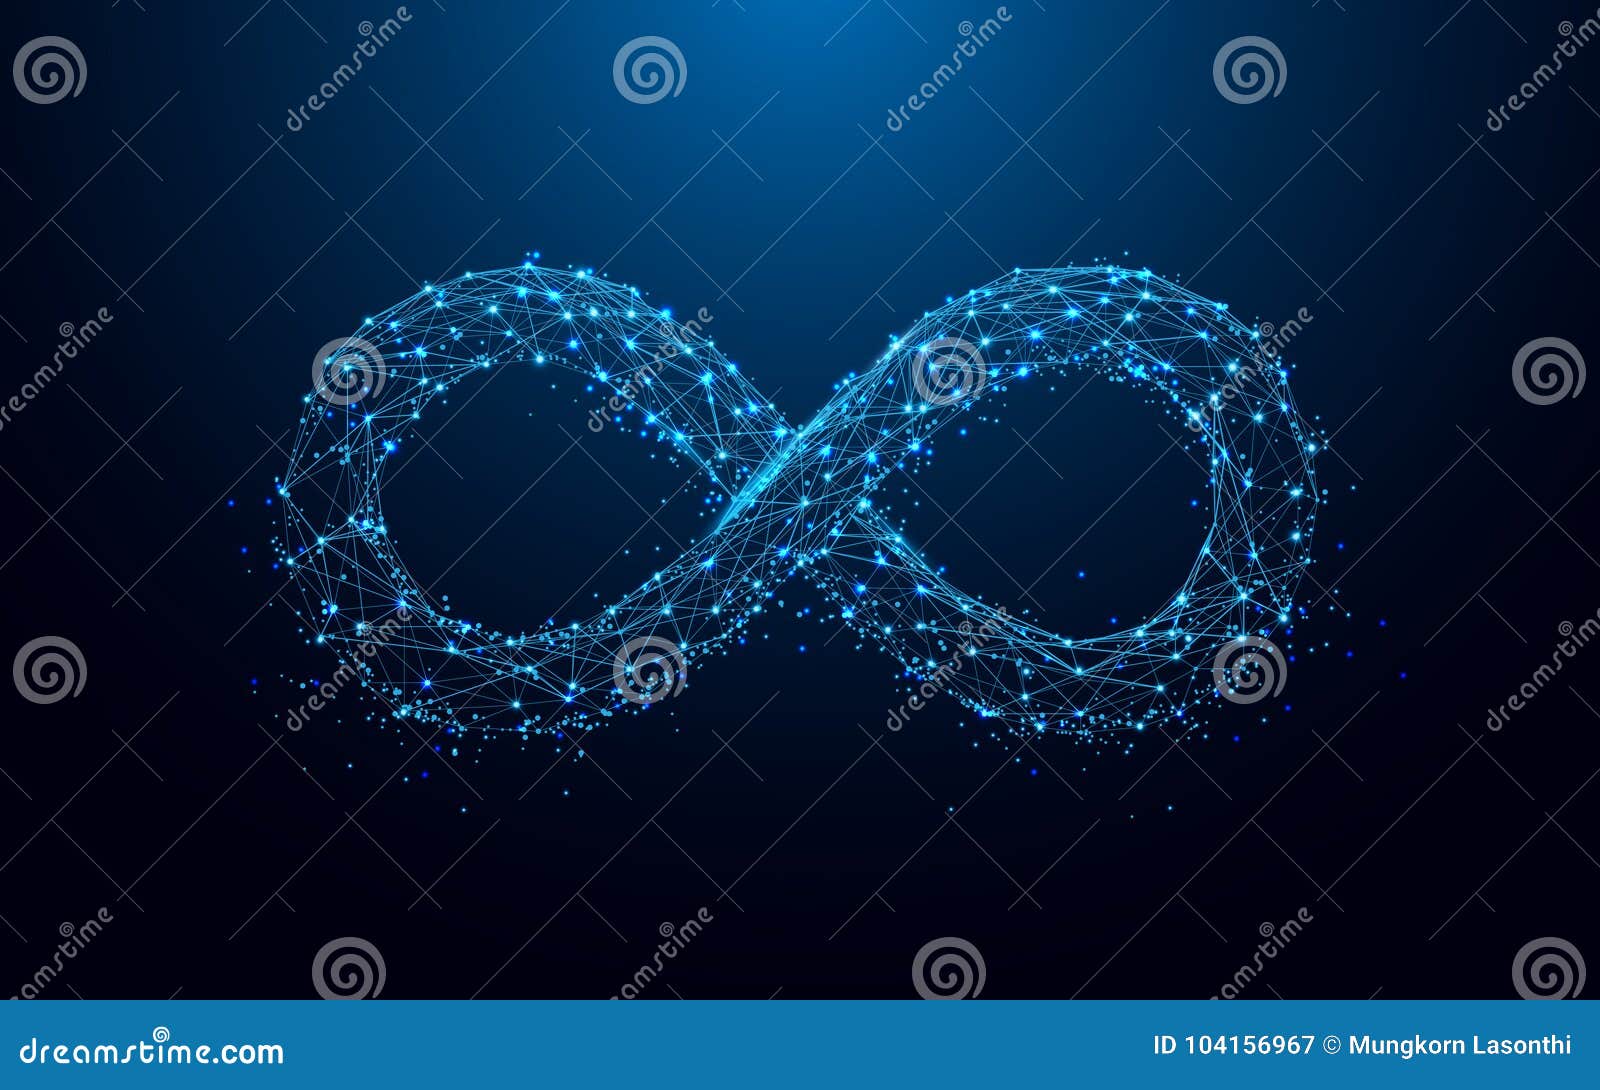 infinity icon from lines and triangles, point connecting network on blue background